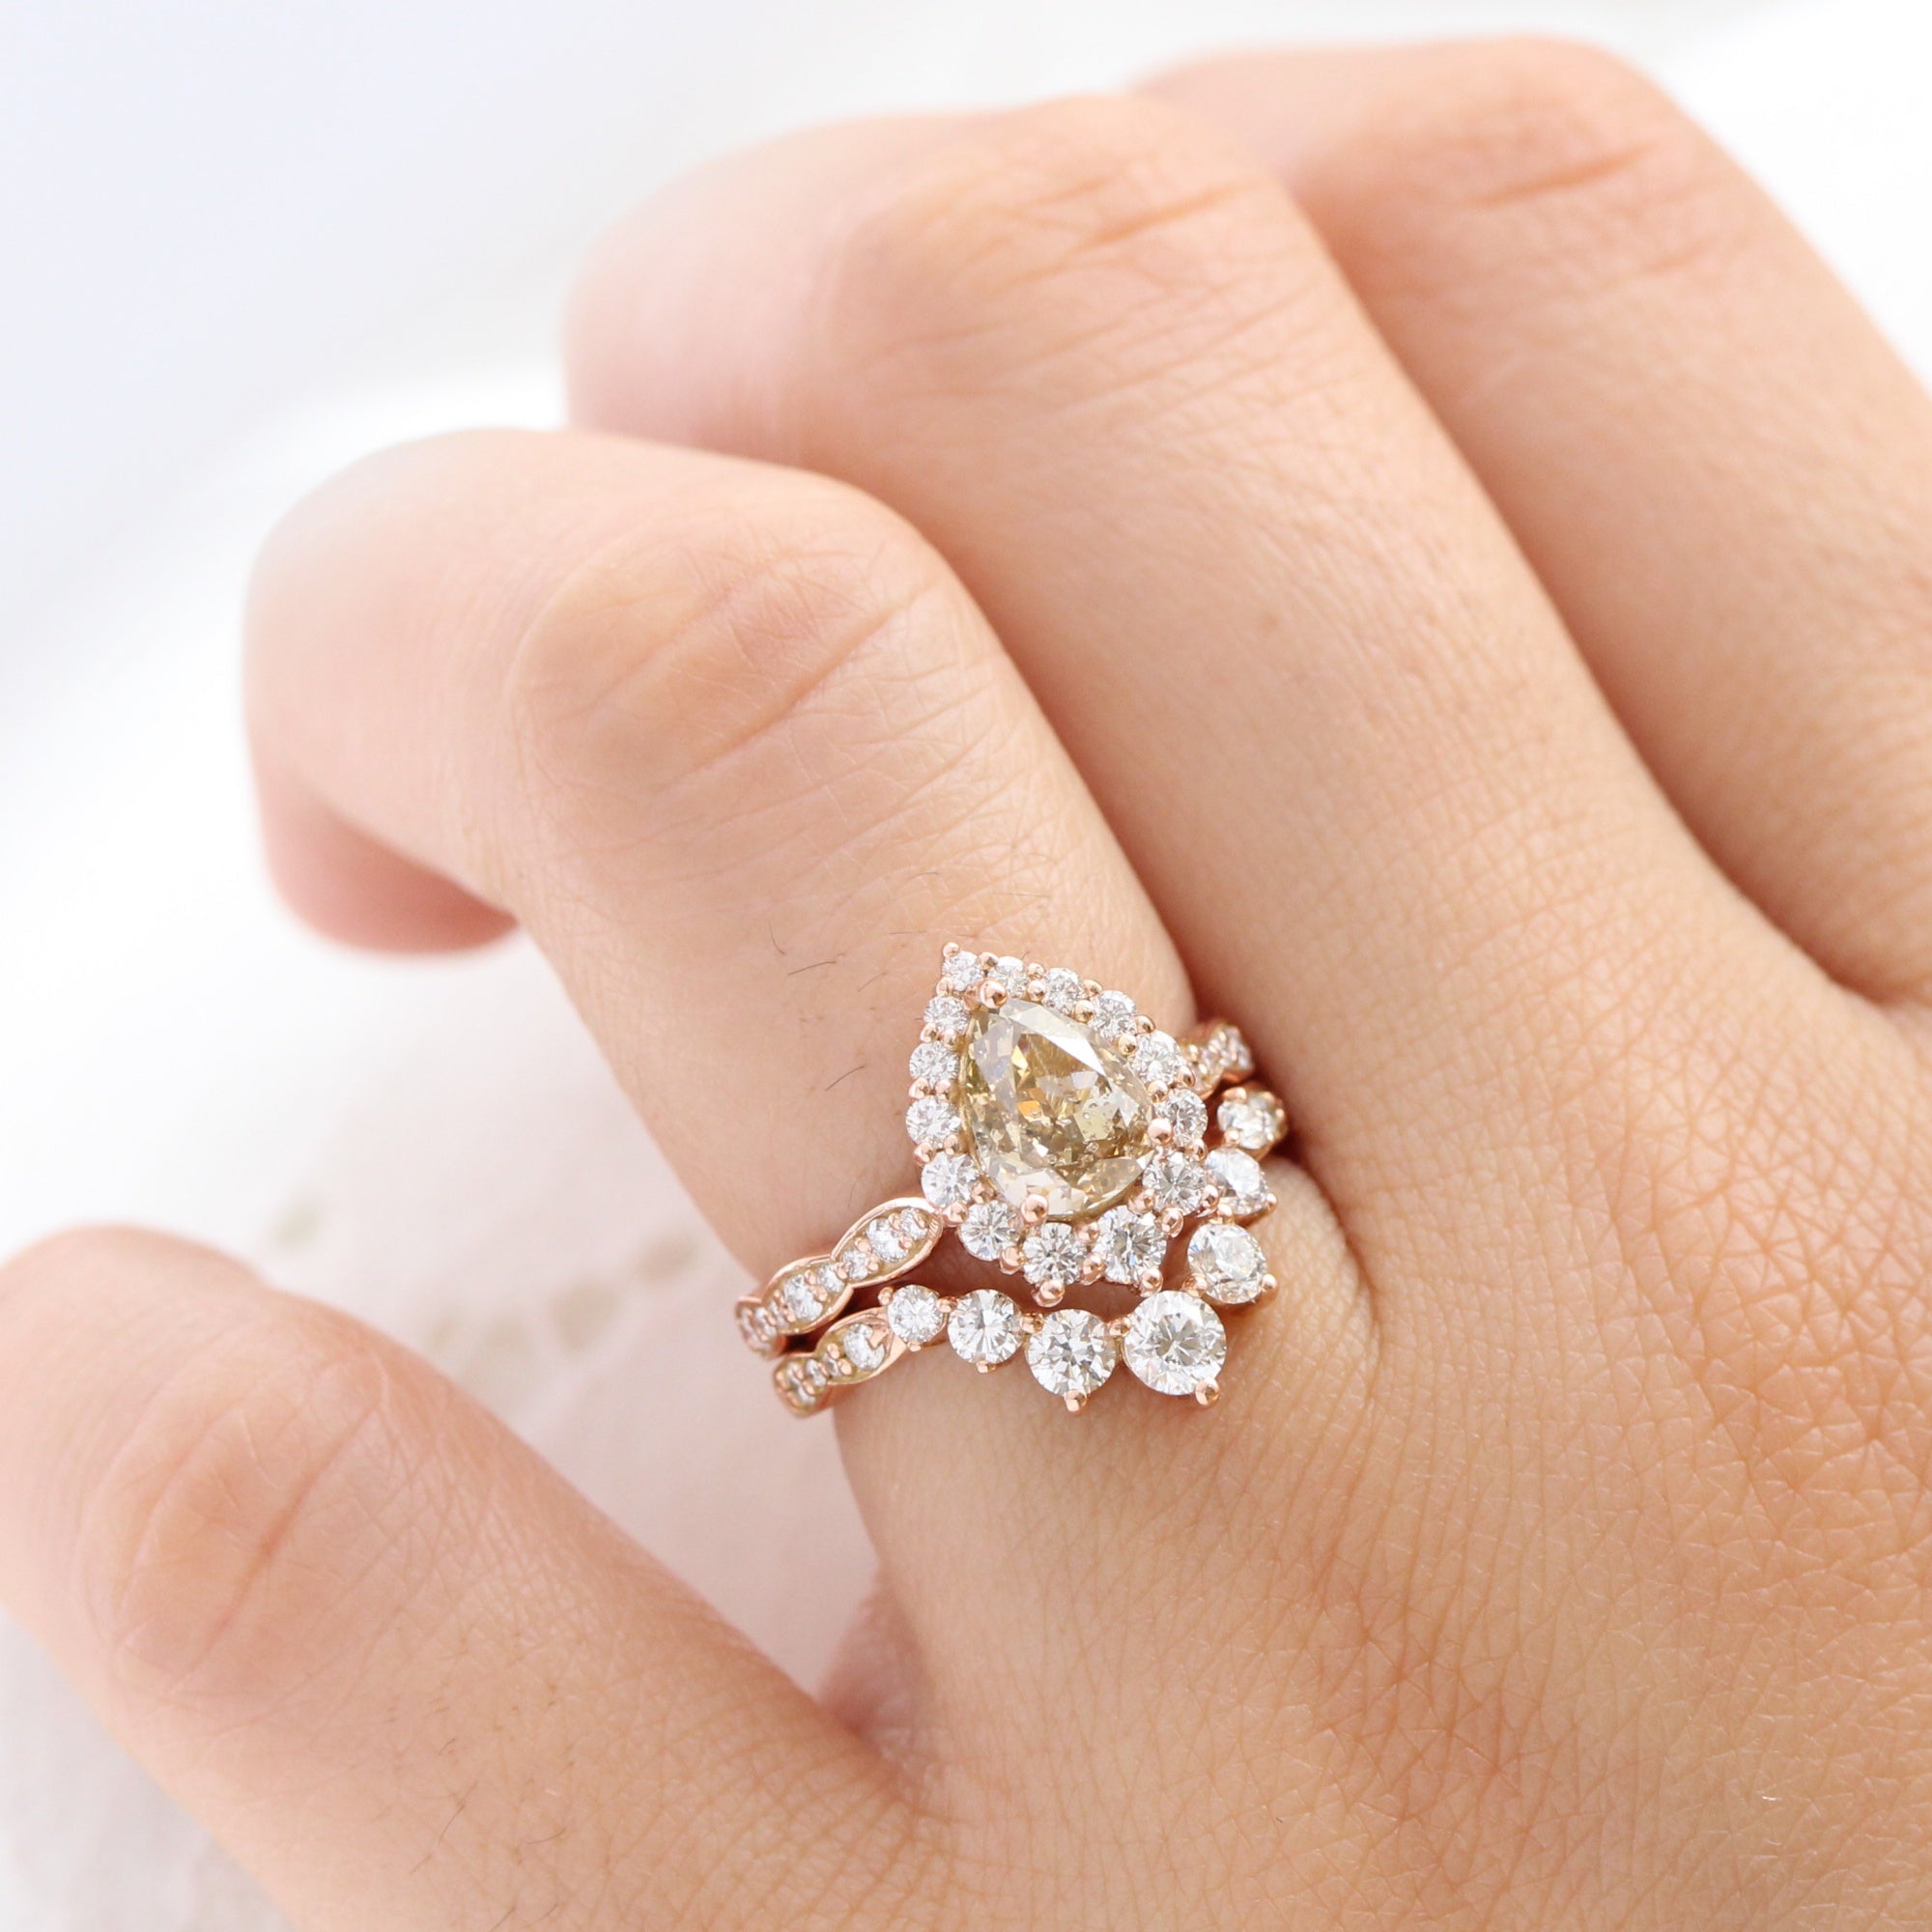 Cocktail Rings - Cocktail Rings Online India | Cocktail ring designs,  Sparkle diamonds, Ring designs